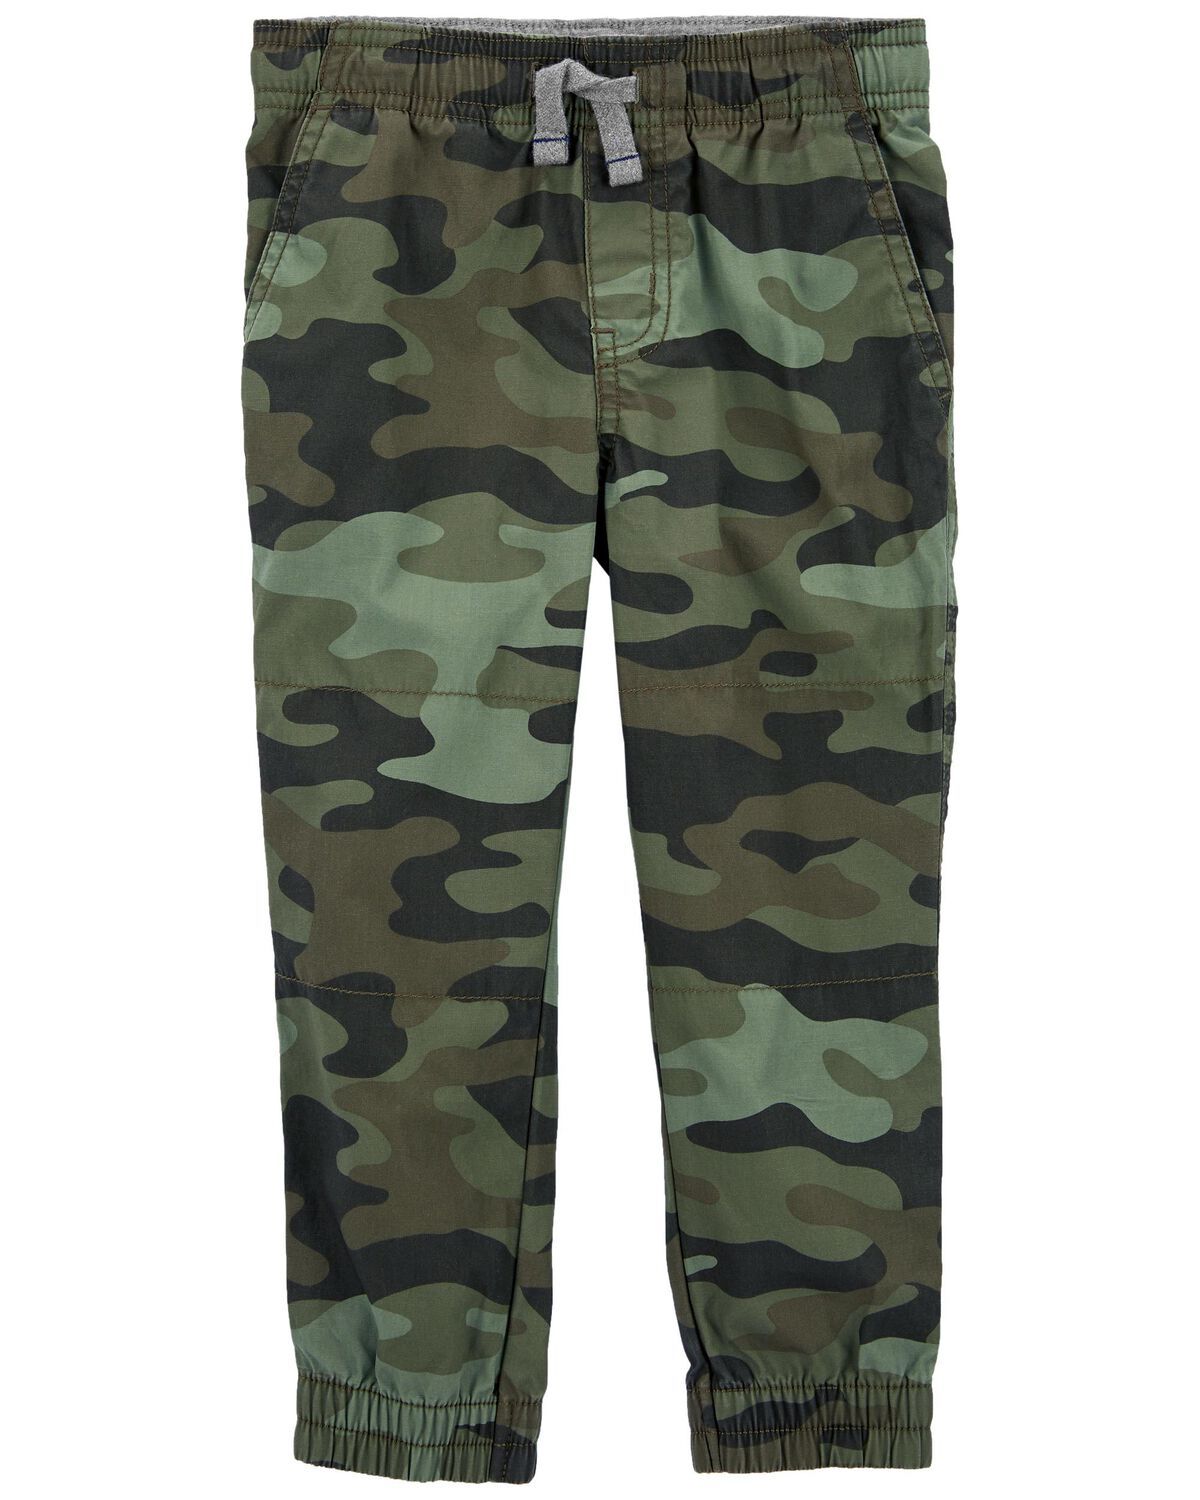 Green Toddler Camo Everyday Pull-On Pants | carters.com | Carter's